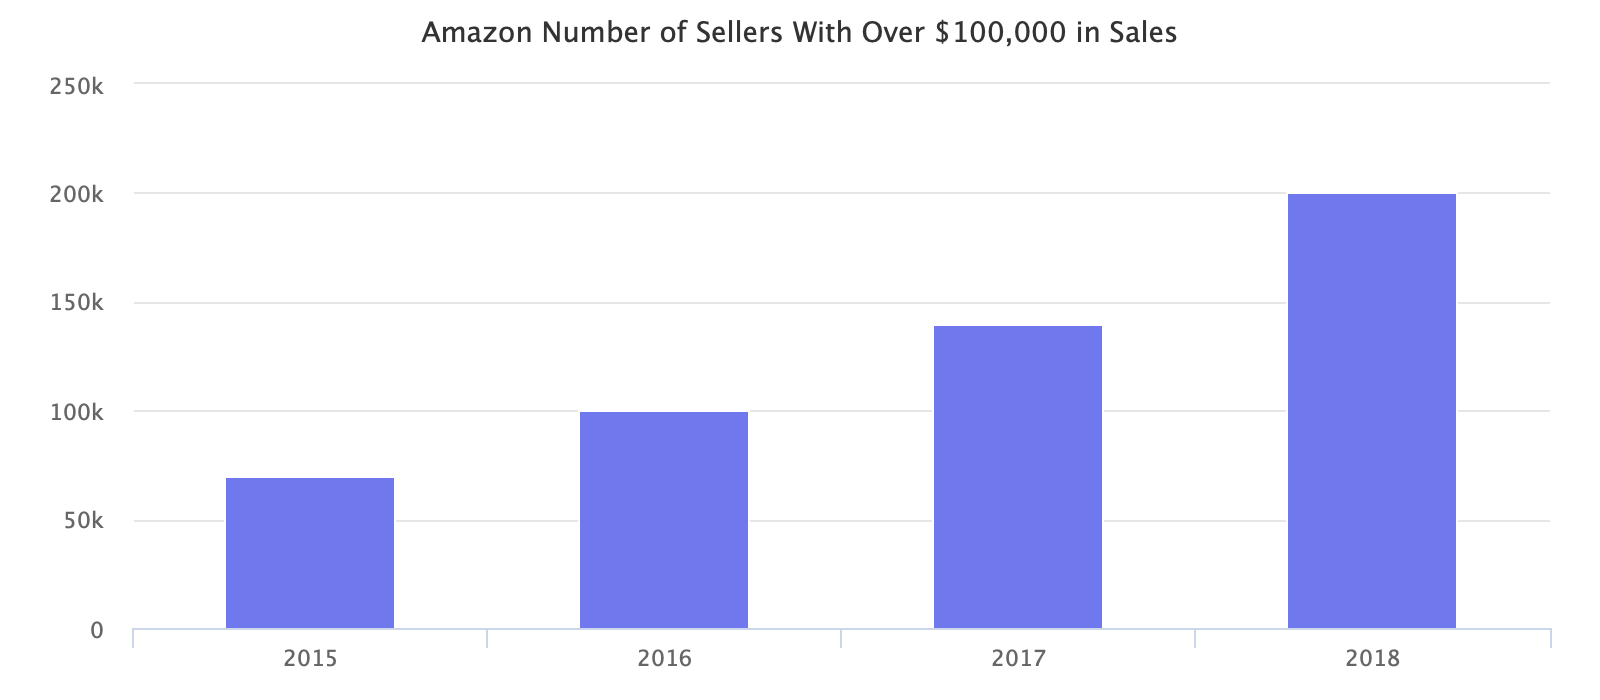 Amazon Number of Sellers With Over $100,000 in Sales